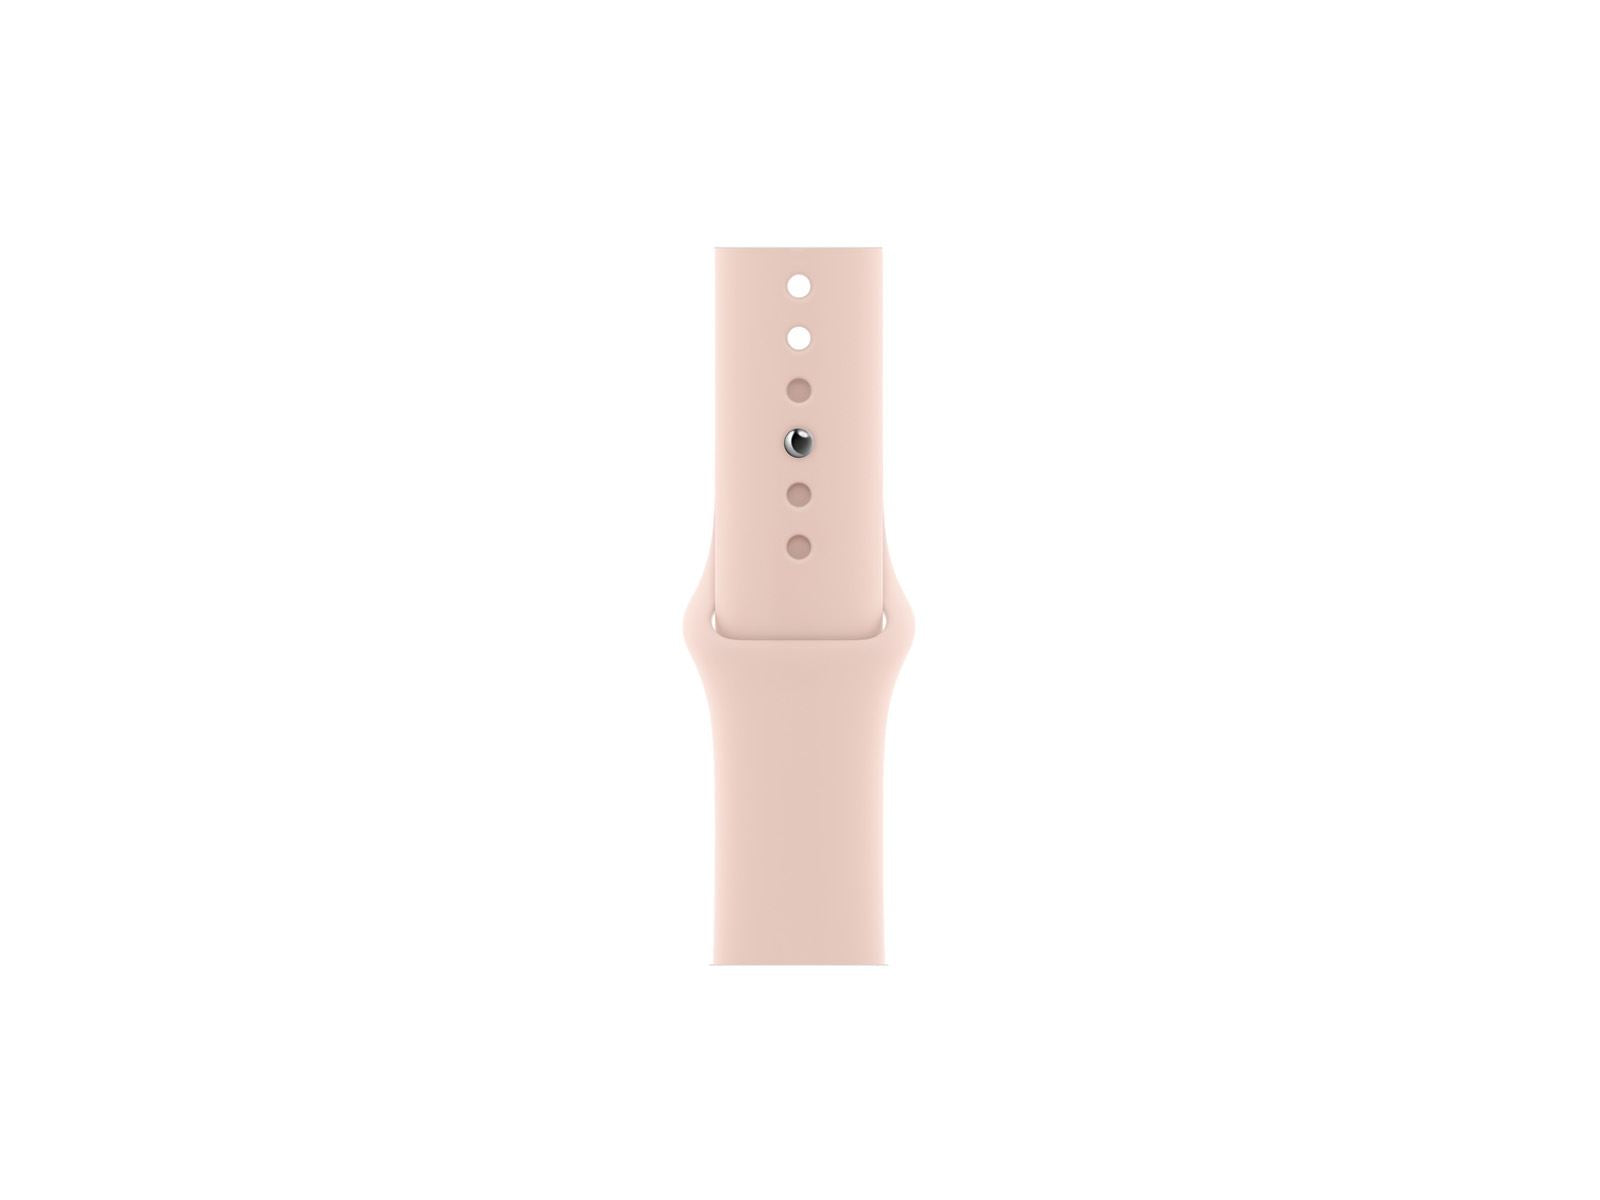 Pink Sand 40mm Apple Watch Strap on a white background